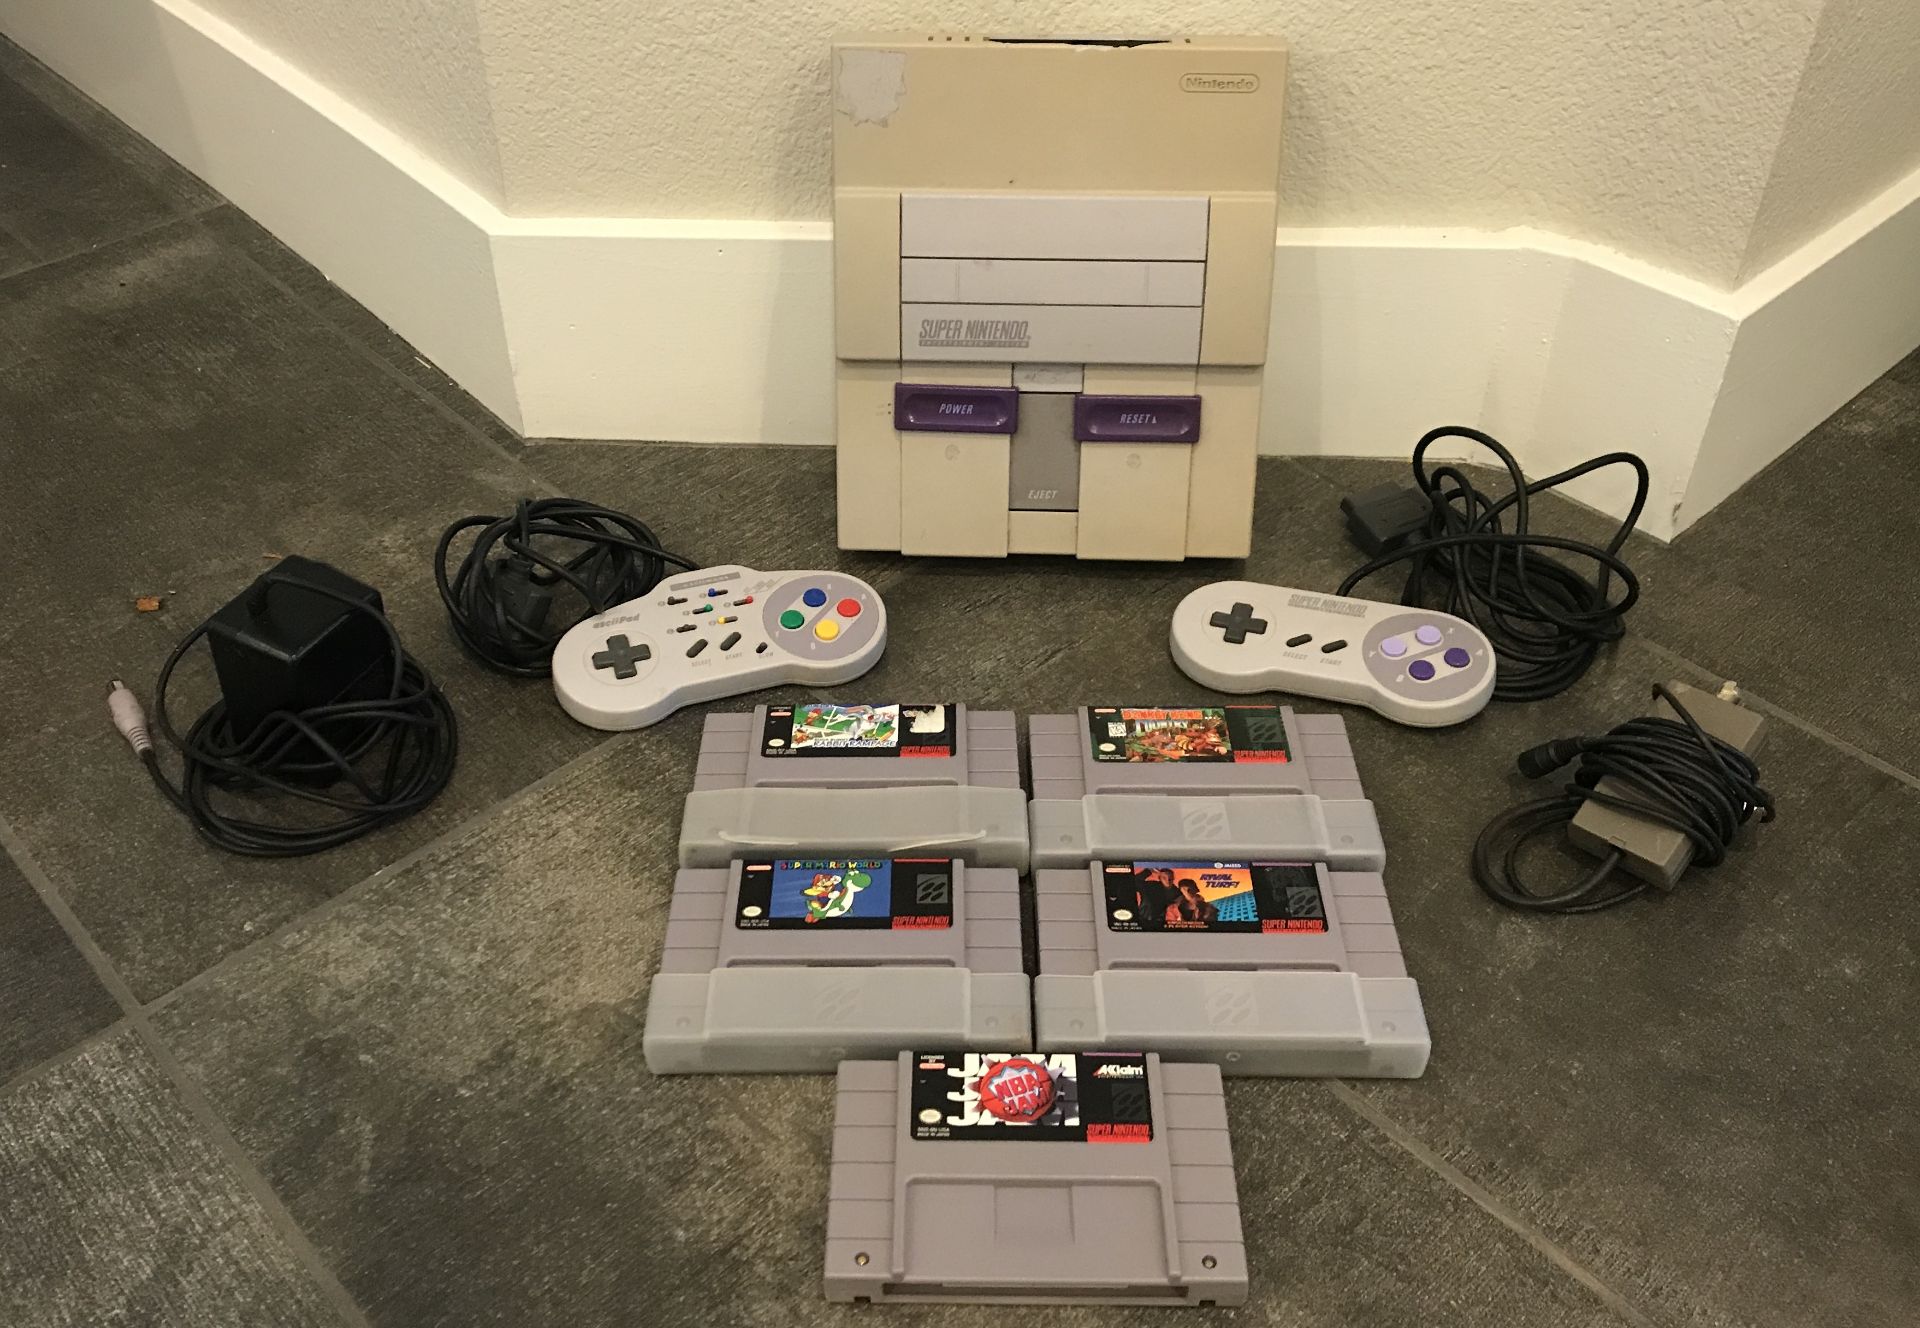 SUPER NINTENDO ENTERTAINMENT SYSTEM WITH TWO CONTROLLERS AND ADAPTERS, FIVE GAMES ALSO INCLUDED